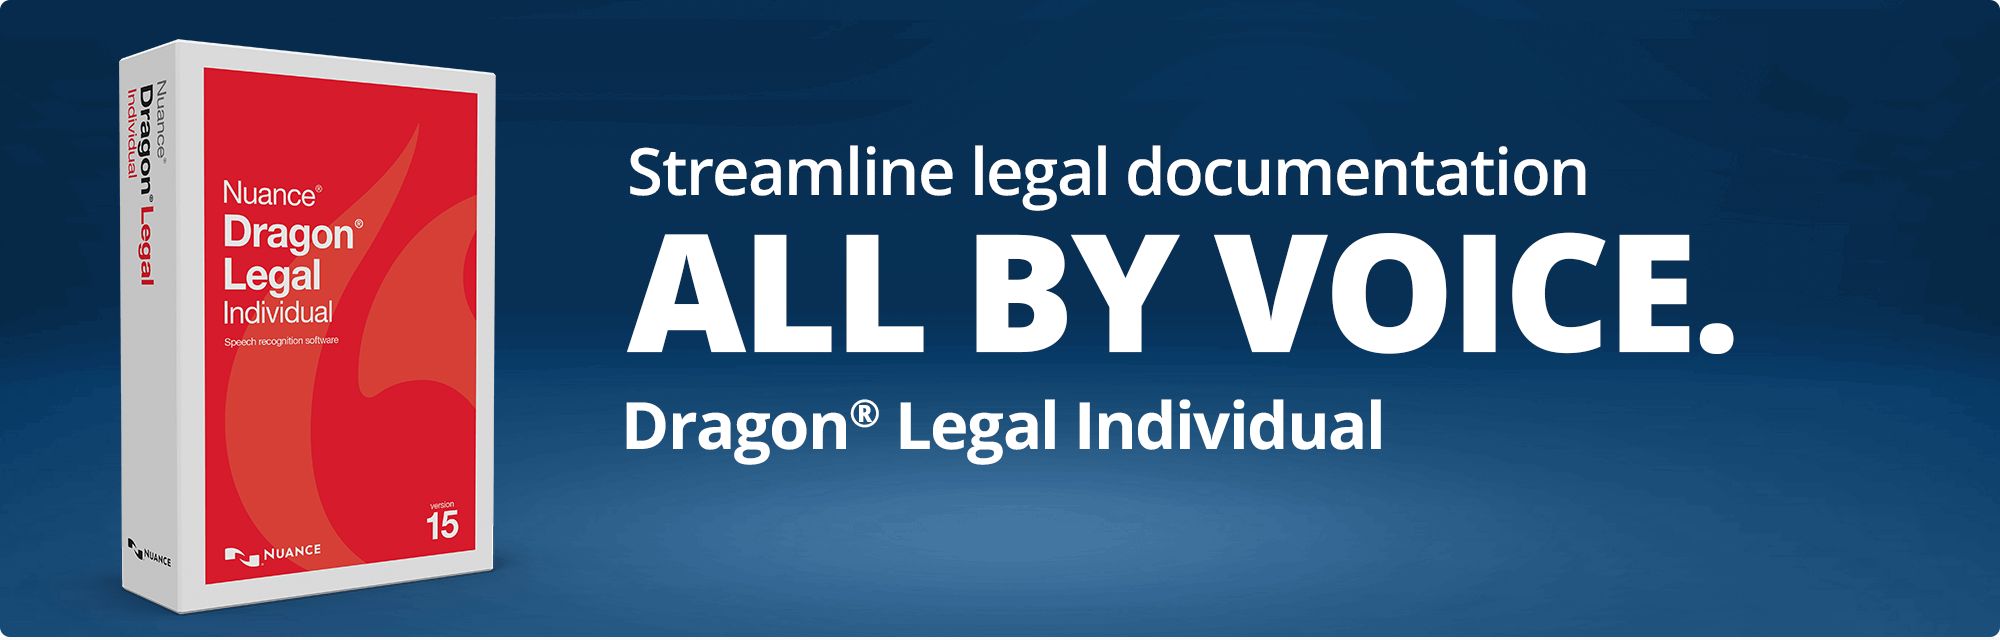 Streamline legal documentation all by voice. Dragon Legal Individual